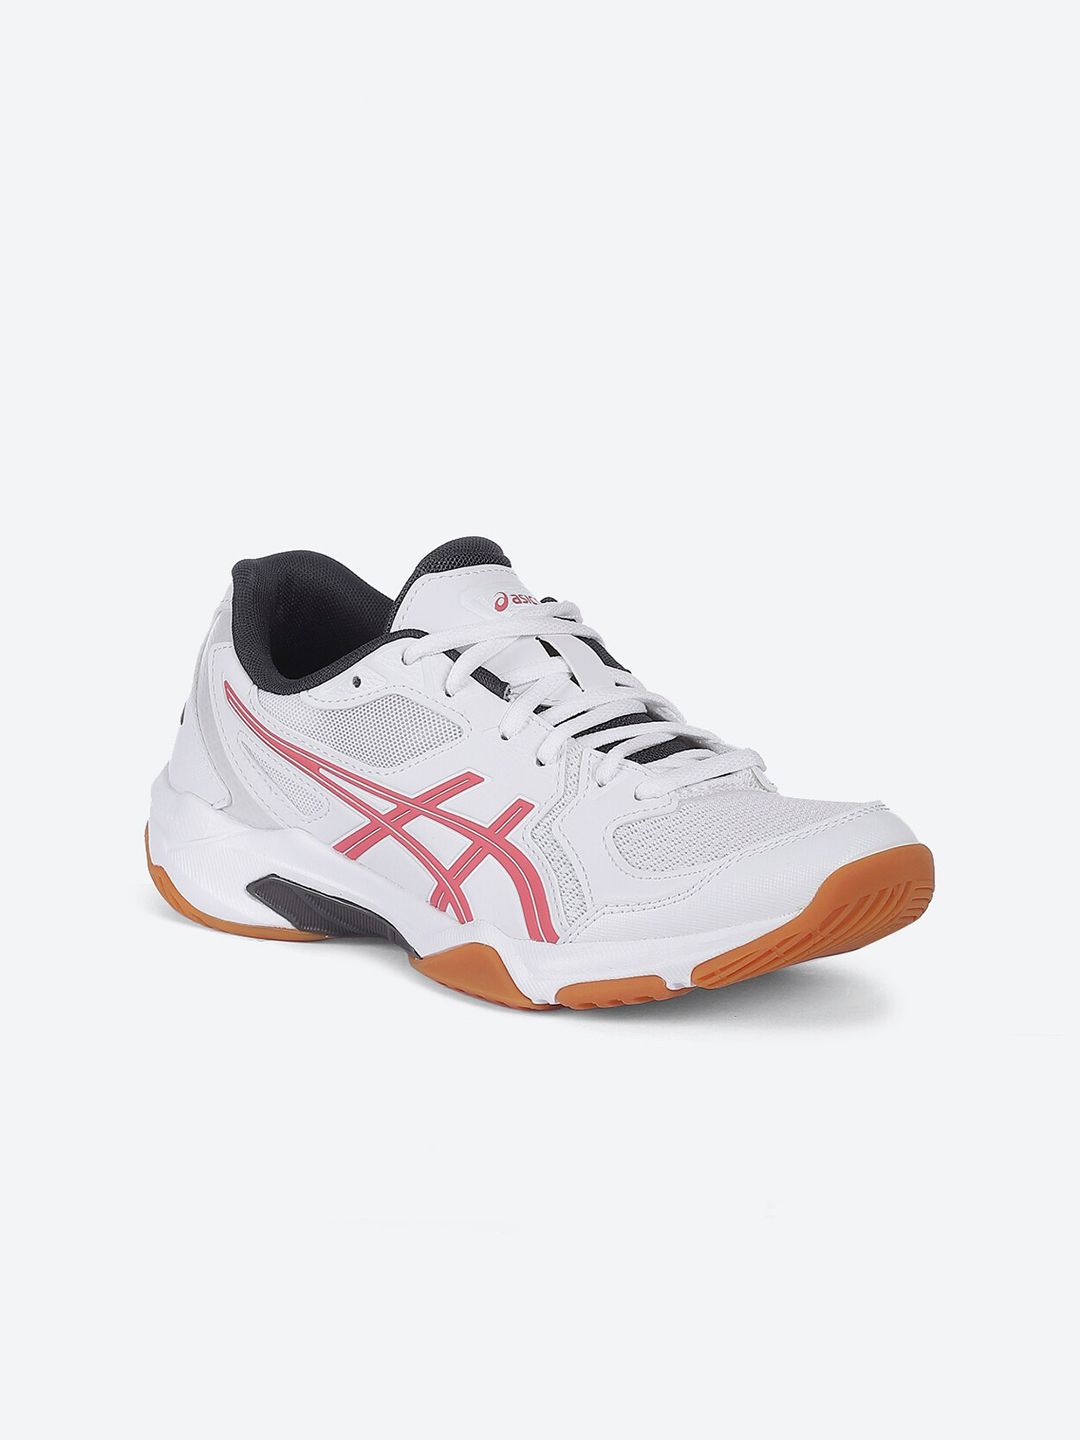 ASICS Women White Sports Shoes Price in India